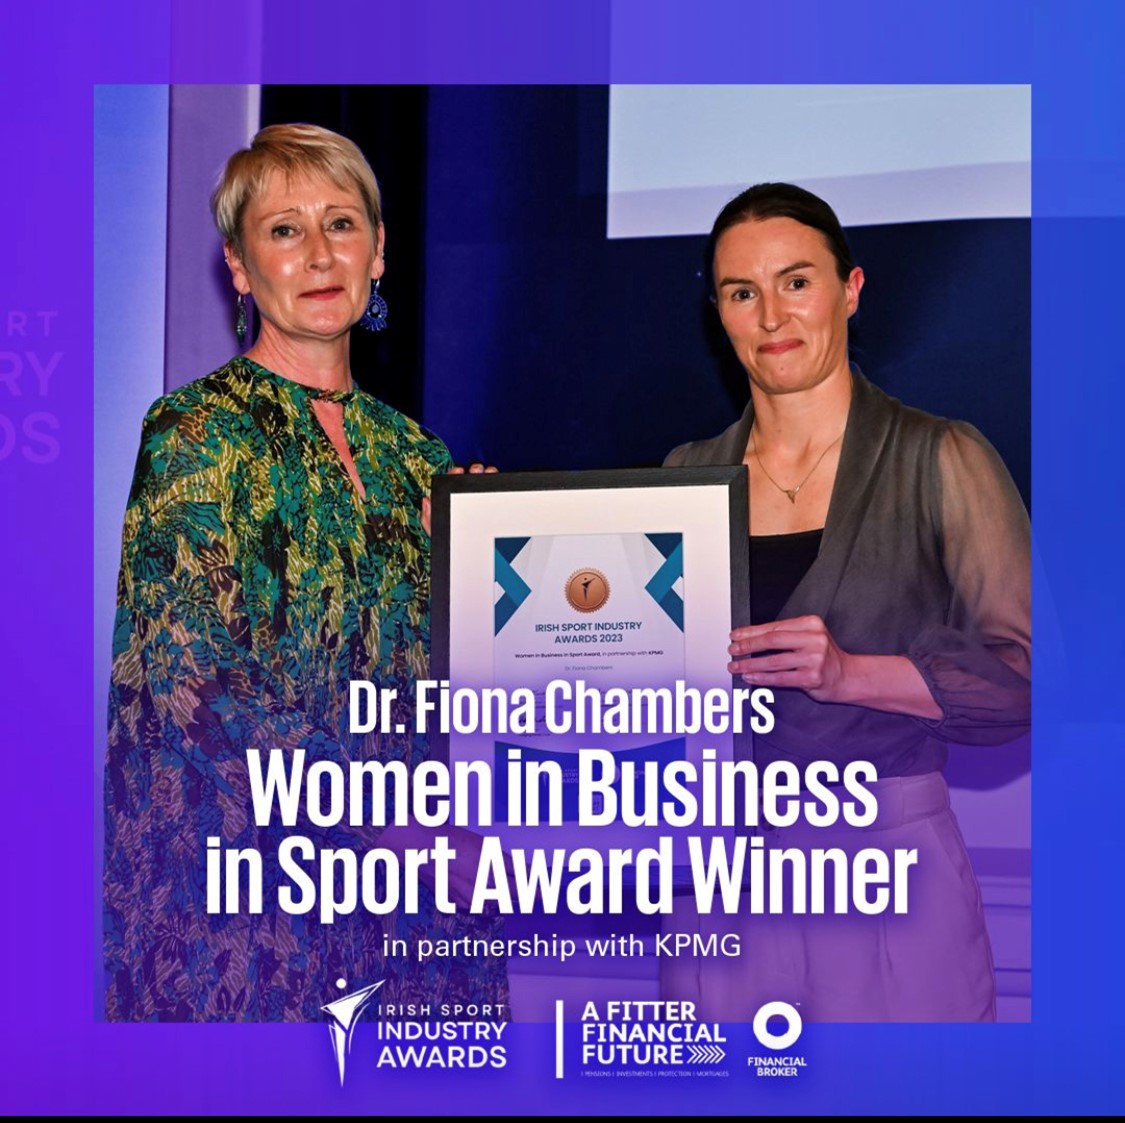 Women in Business in Sport Award goes to Dr Fiona Chambers